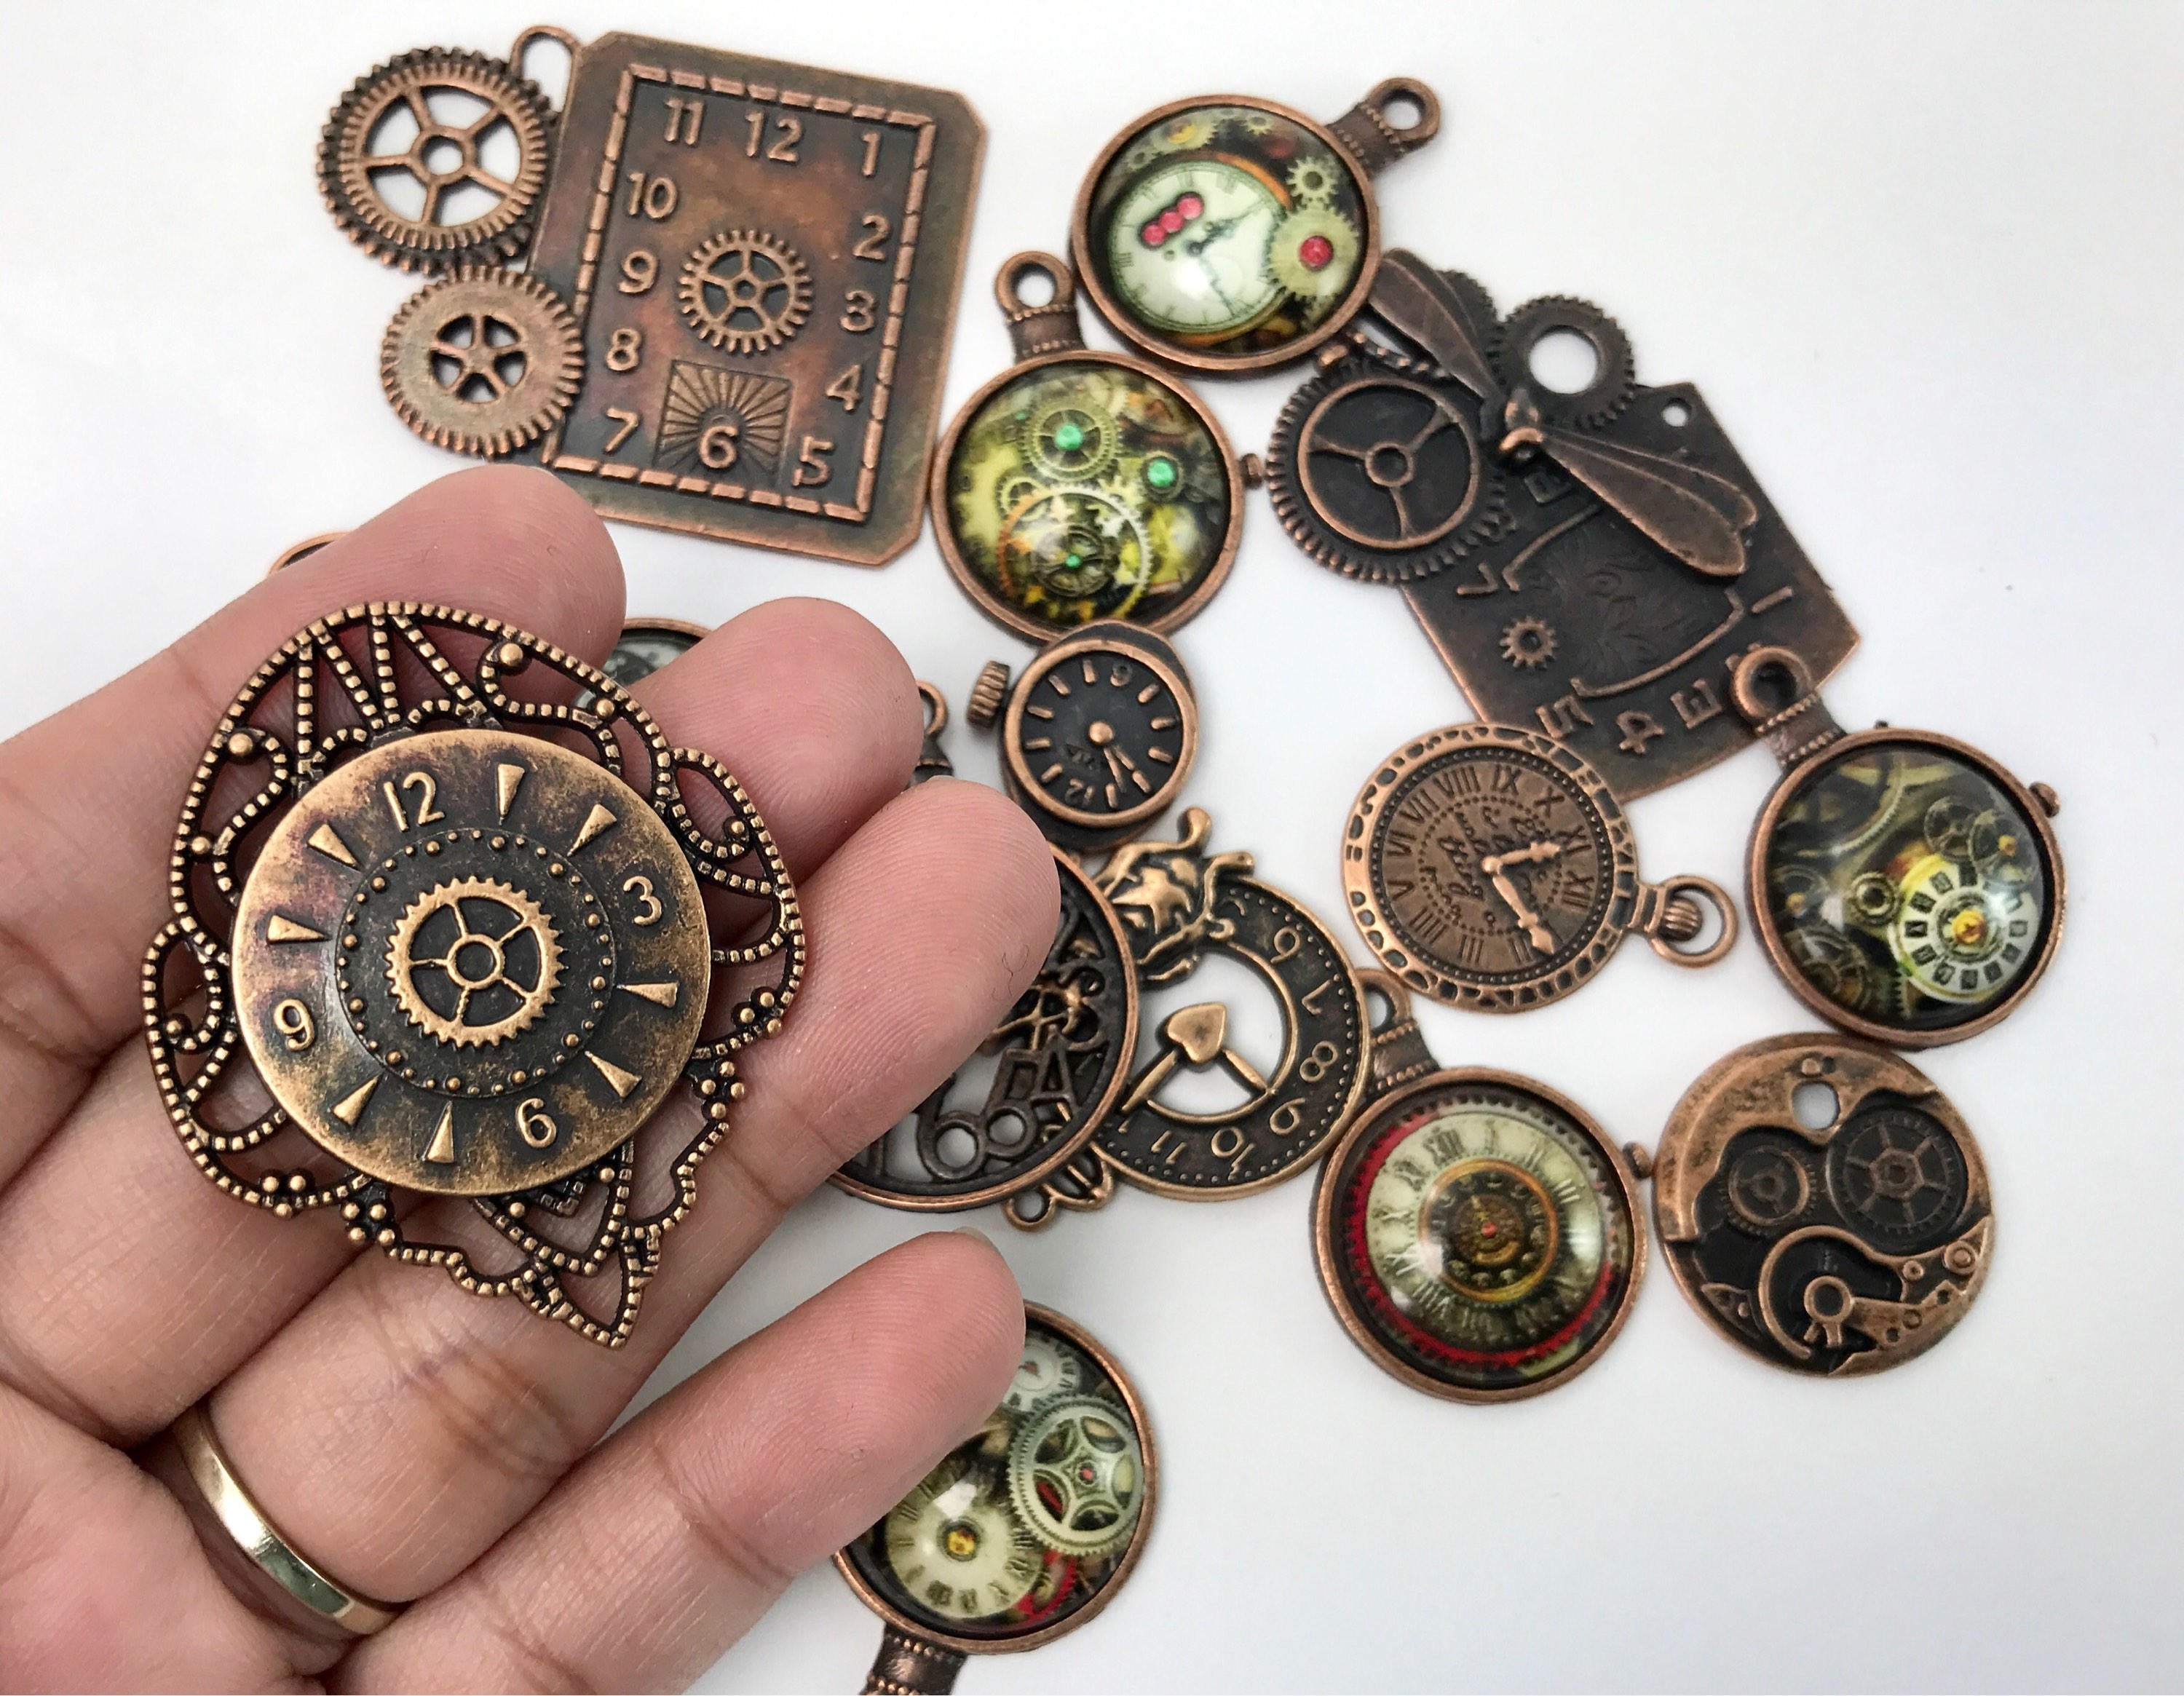 15 Pcs Mixed Charms - Vintage Clocks in Red Copper